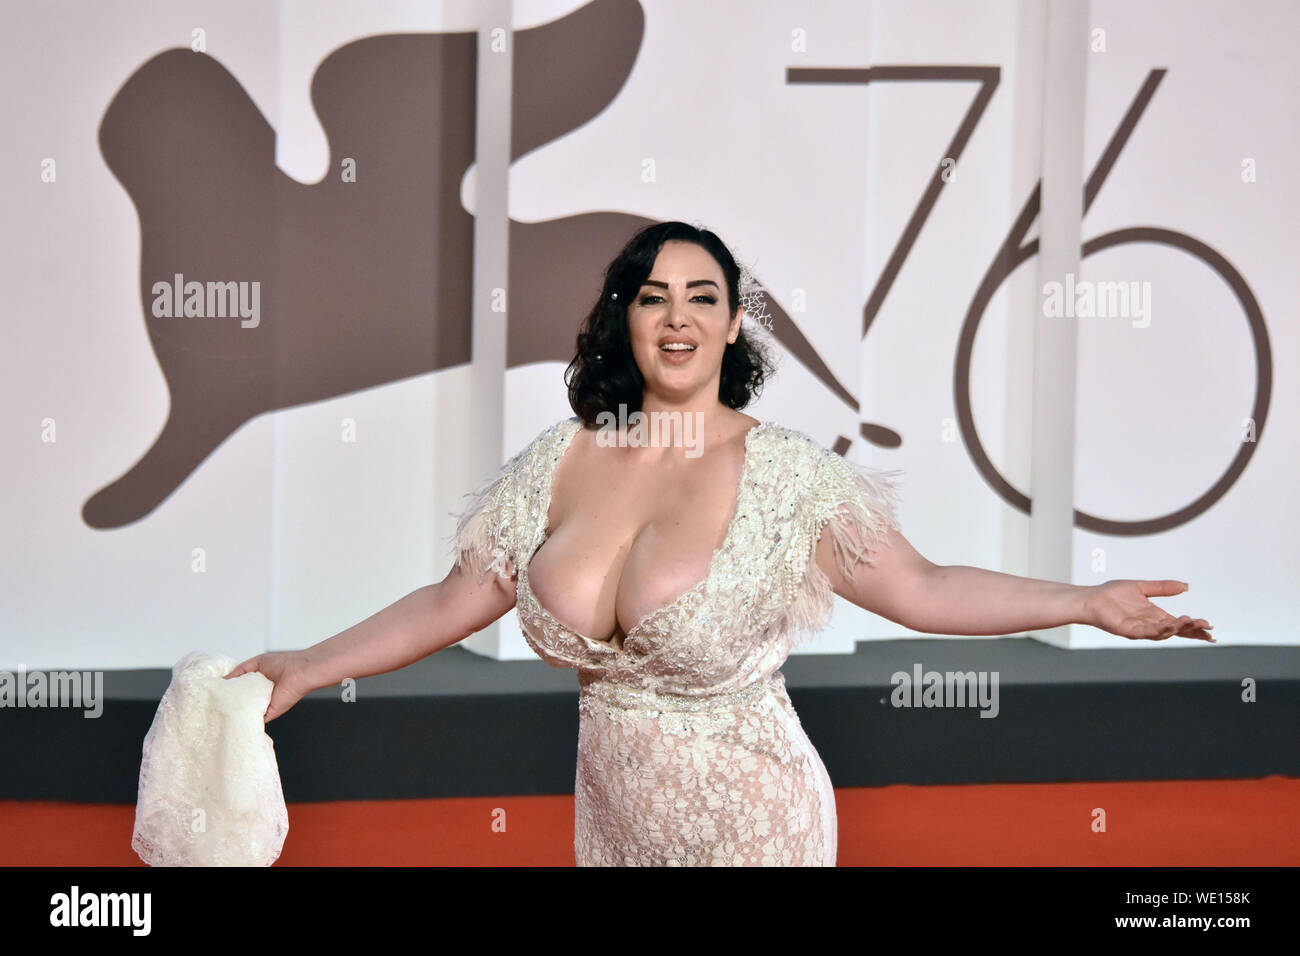 VENICE, ITALY - 29th August, 2019. Francesca Giuliano attends the red carpet of AD ASTRA during the 76th Venice Film Festival on August 29, 2019 in Venice, Italy. © Andrea Merola/Awakening/Alamy Live News Stock Photo